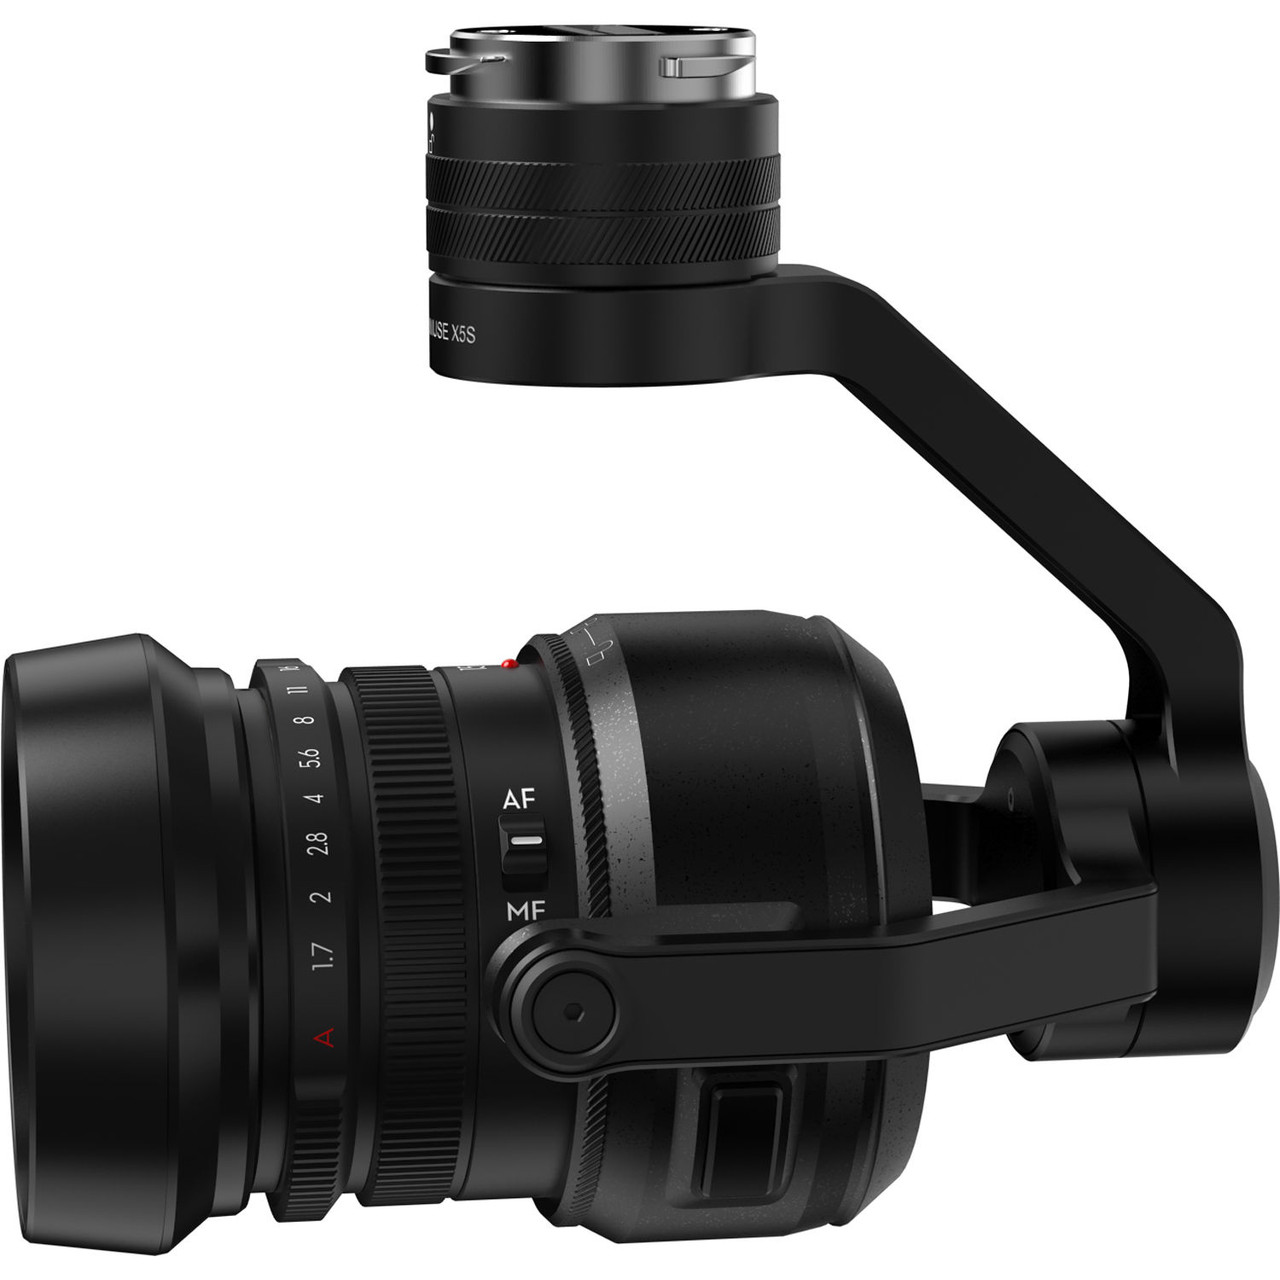 CP.IN.00000014.01 2 Standard Kit with Zenmuse X5S Gimbal & ASPH Lens